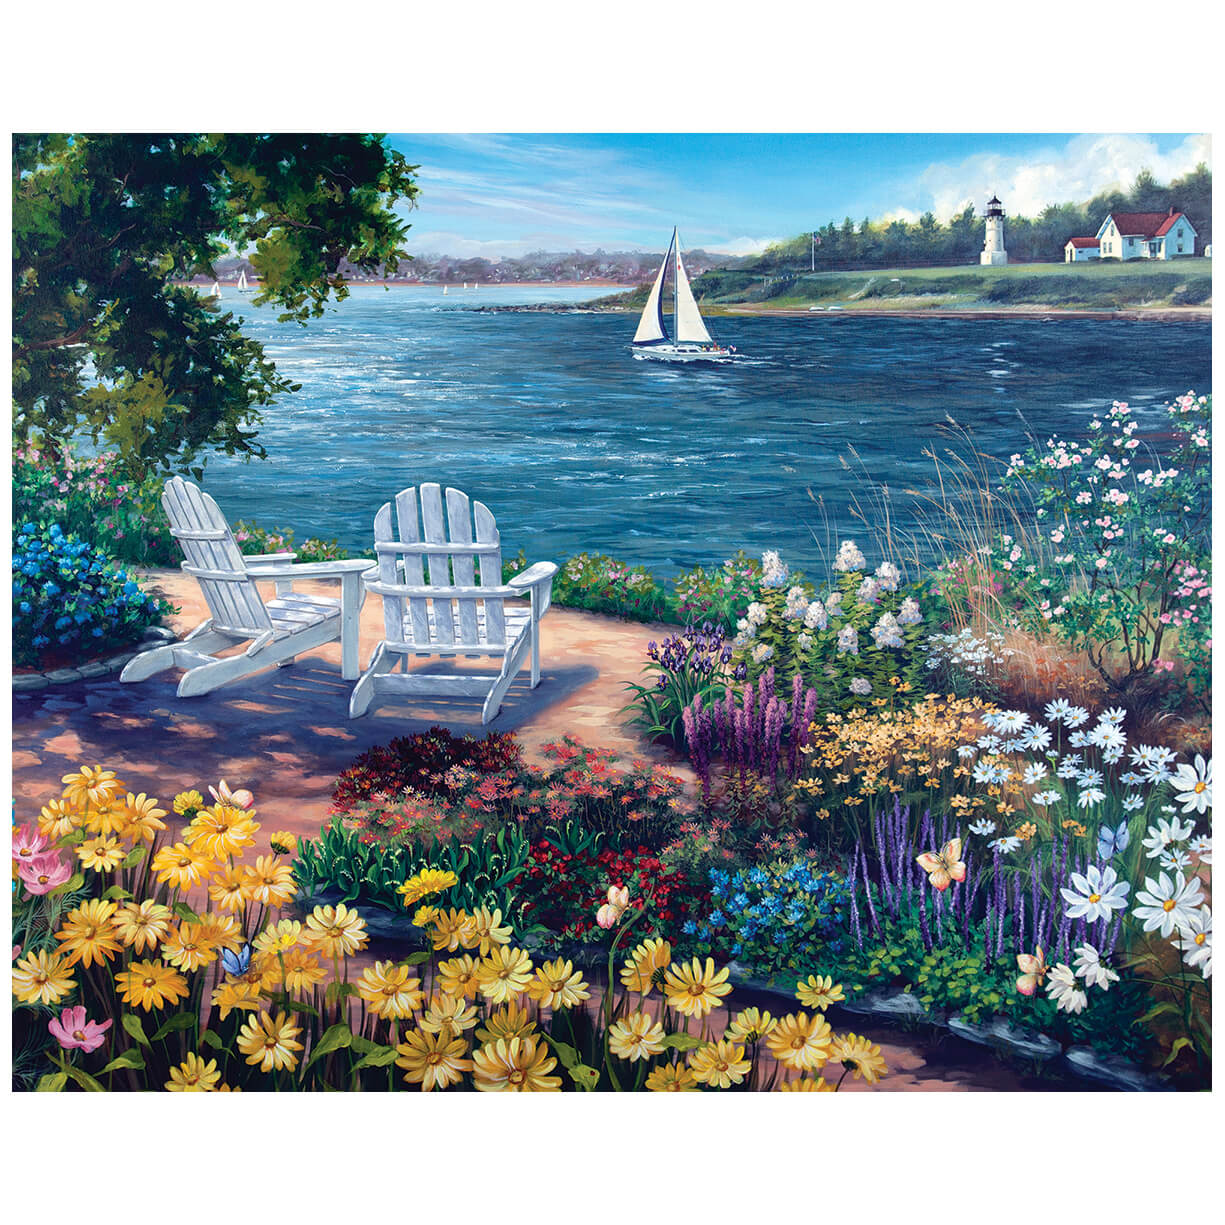 White Mountain Puzzles Garden by the Bay 1000 Piece Jigsaw Puzzle